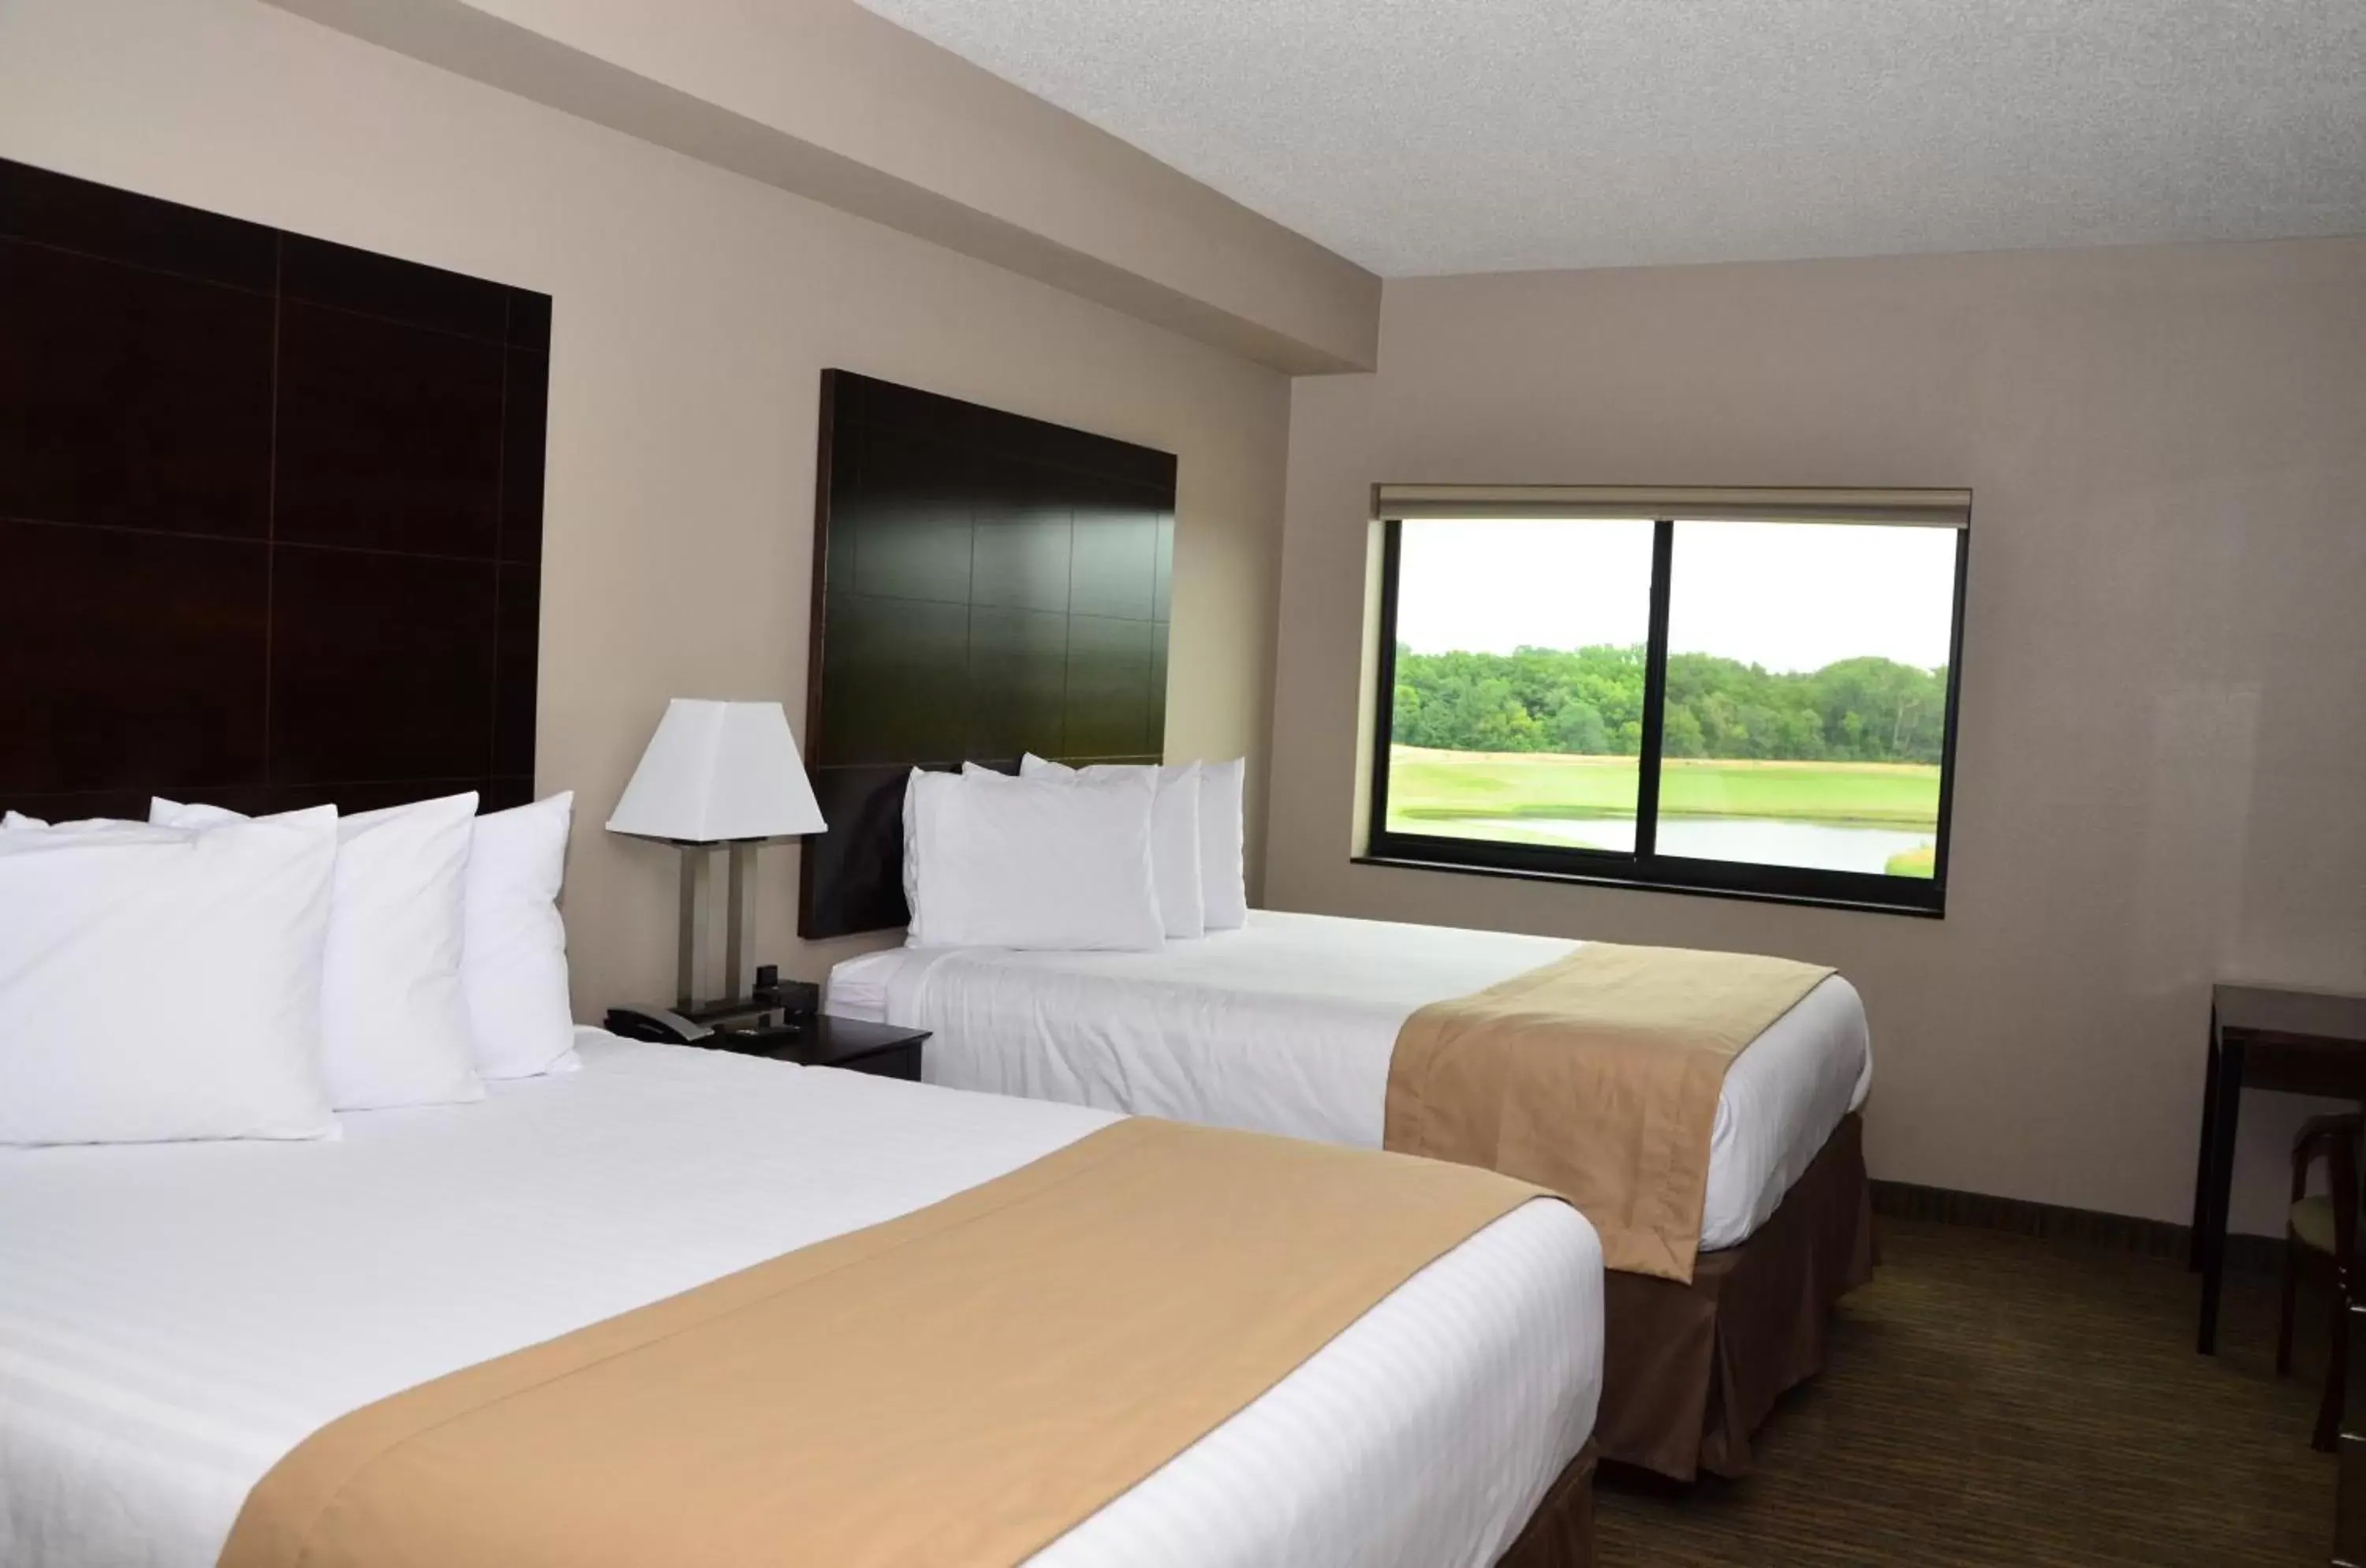 Superior Queen Room with Two Queen Beds in Qube Hotel - Polk City